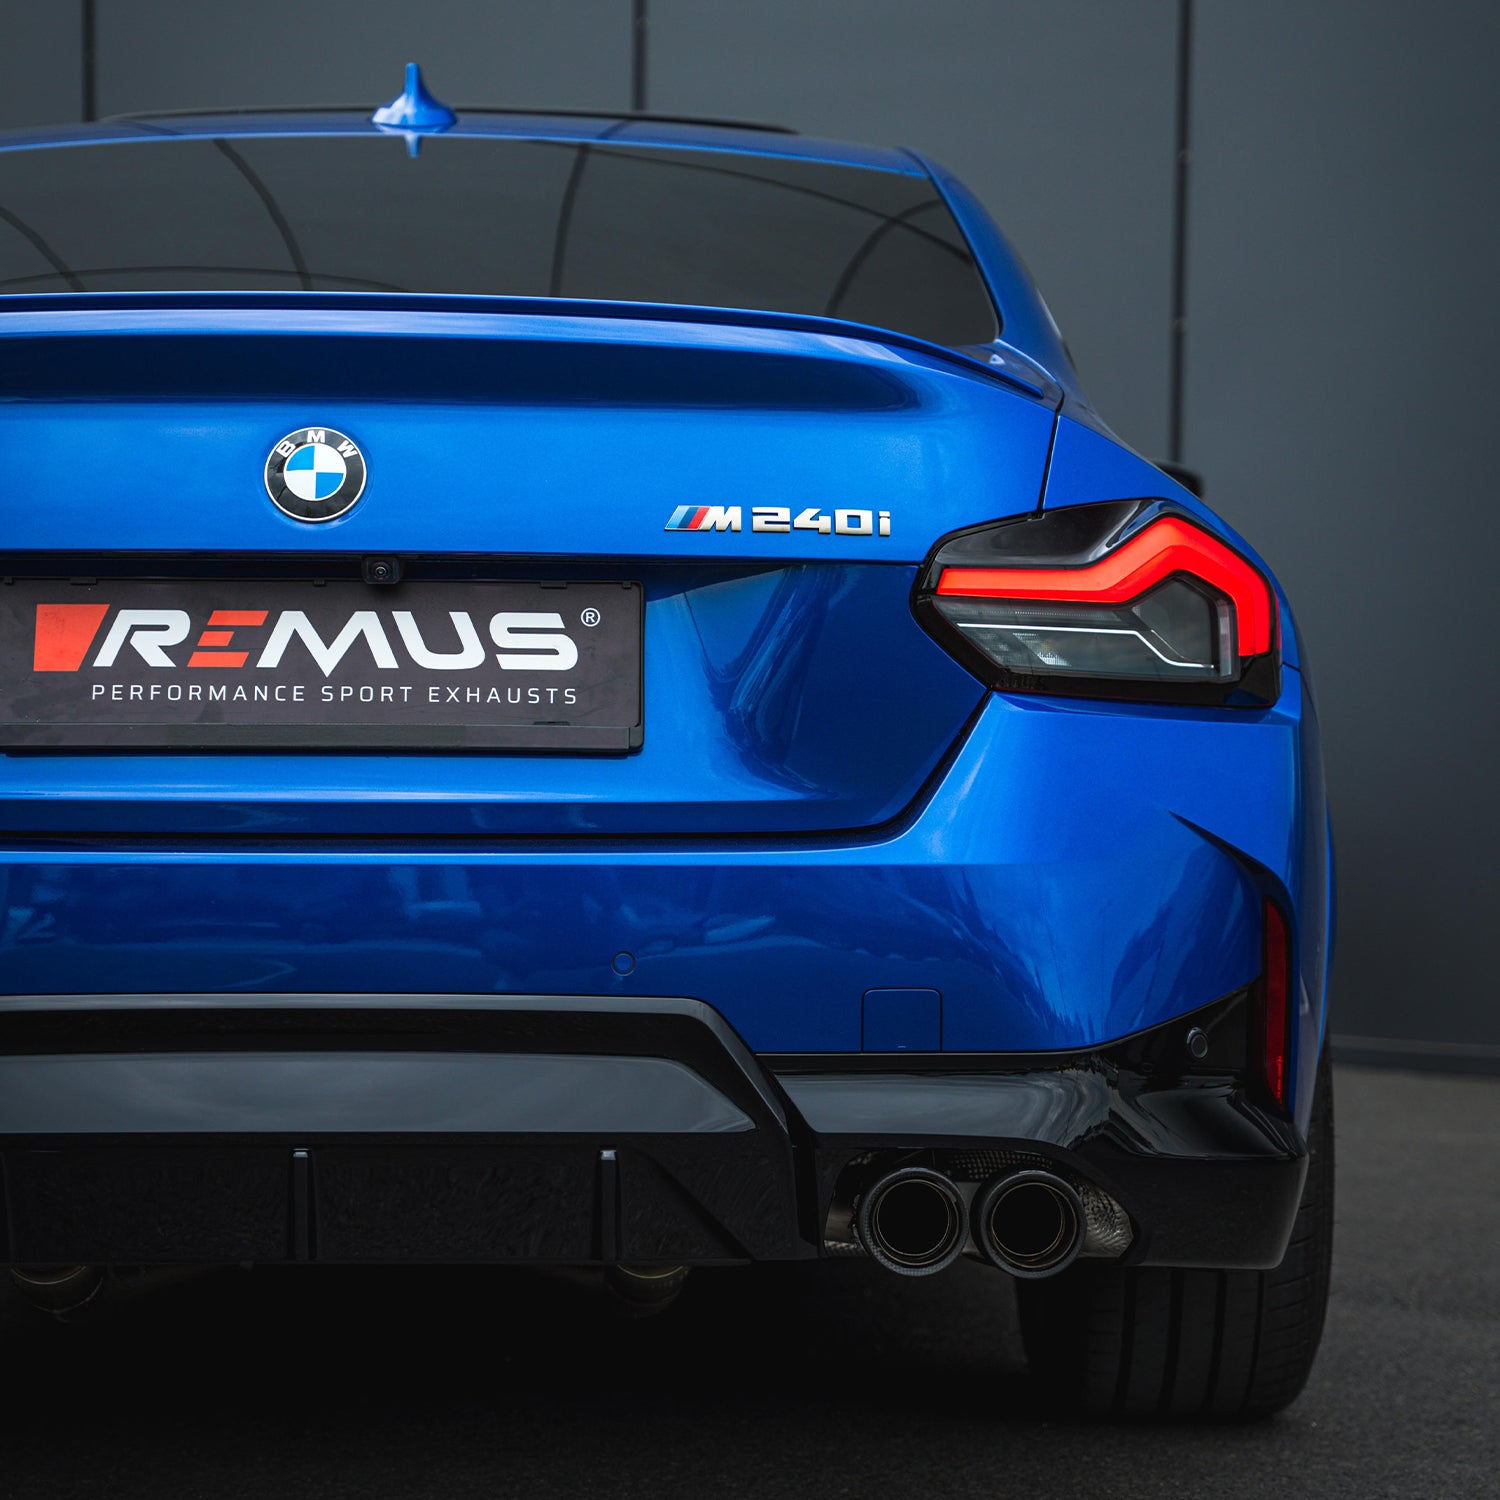 Remus Exhaust BMW G42 M240i RACING Cat Back Exhaust System Fitted On Car